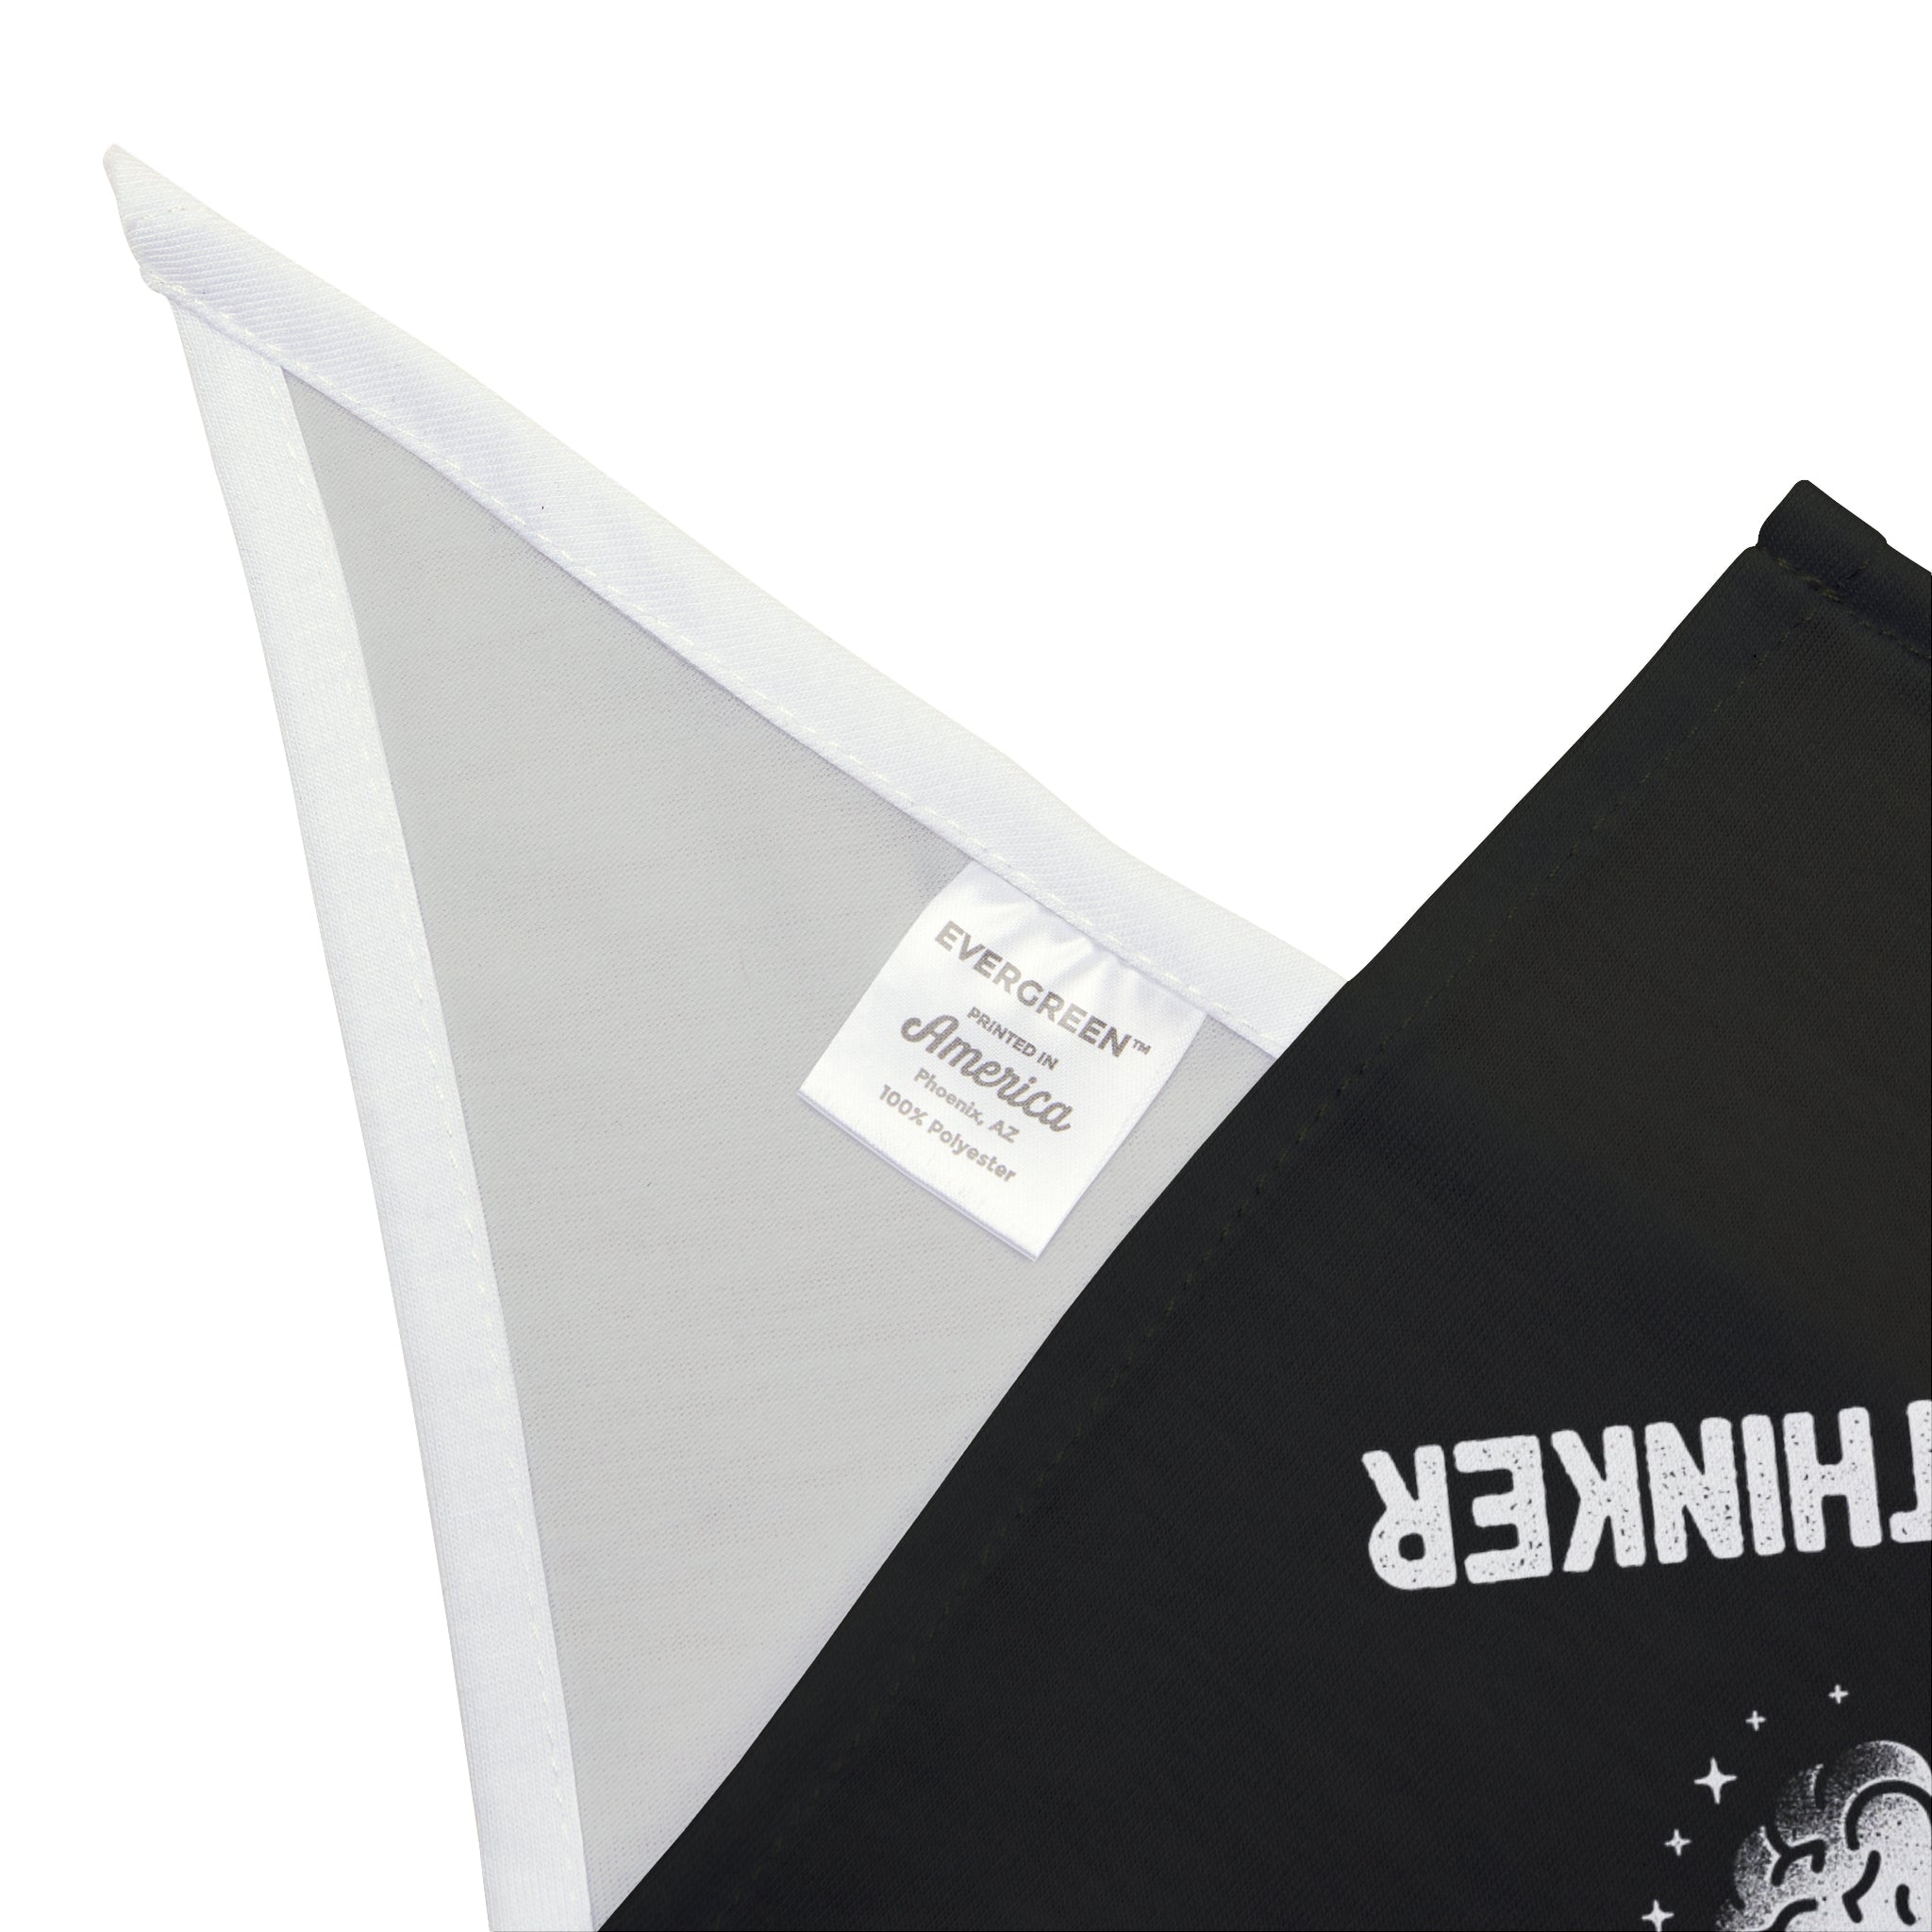 Close-up of a black and white fabric item with a visible tag that reads "EVERGREEN America 100% soft-spun polyester." Part of a printed design can be seen on the black portion of the Professional Overthinker - Pet Bandana.